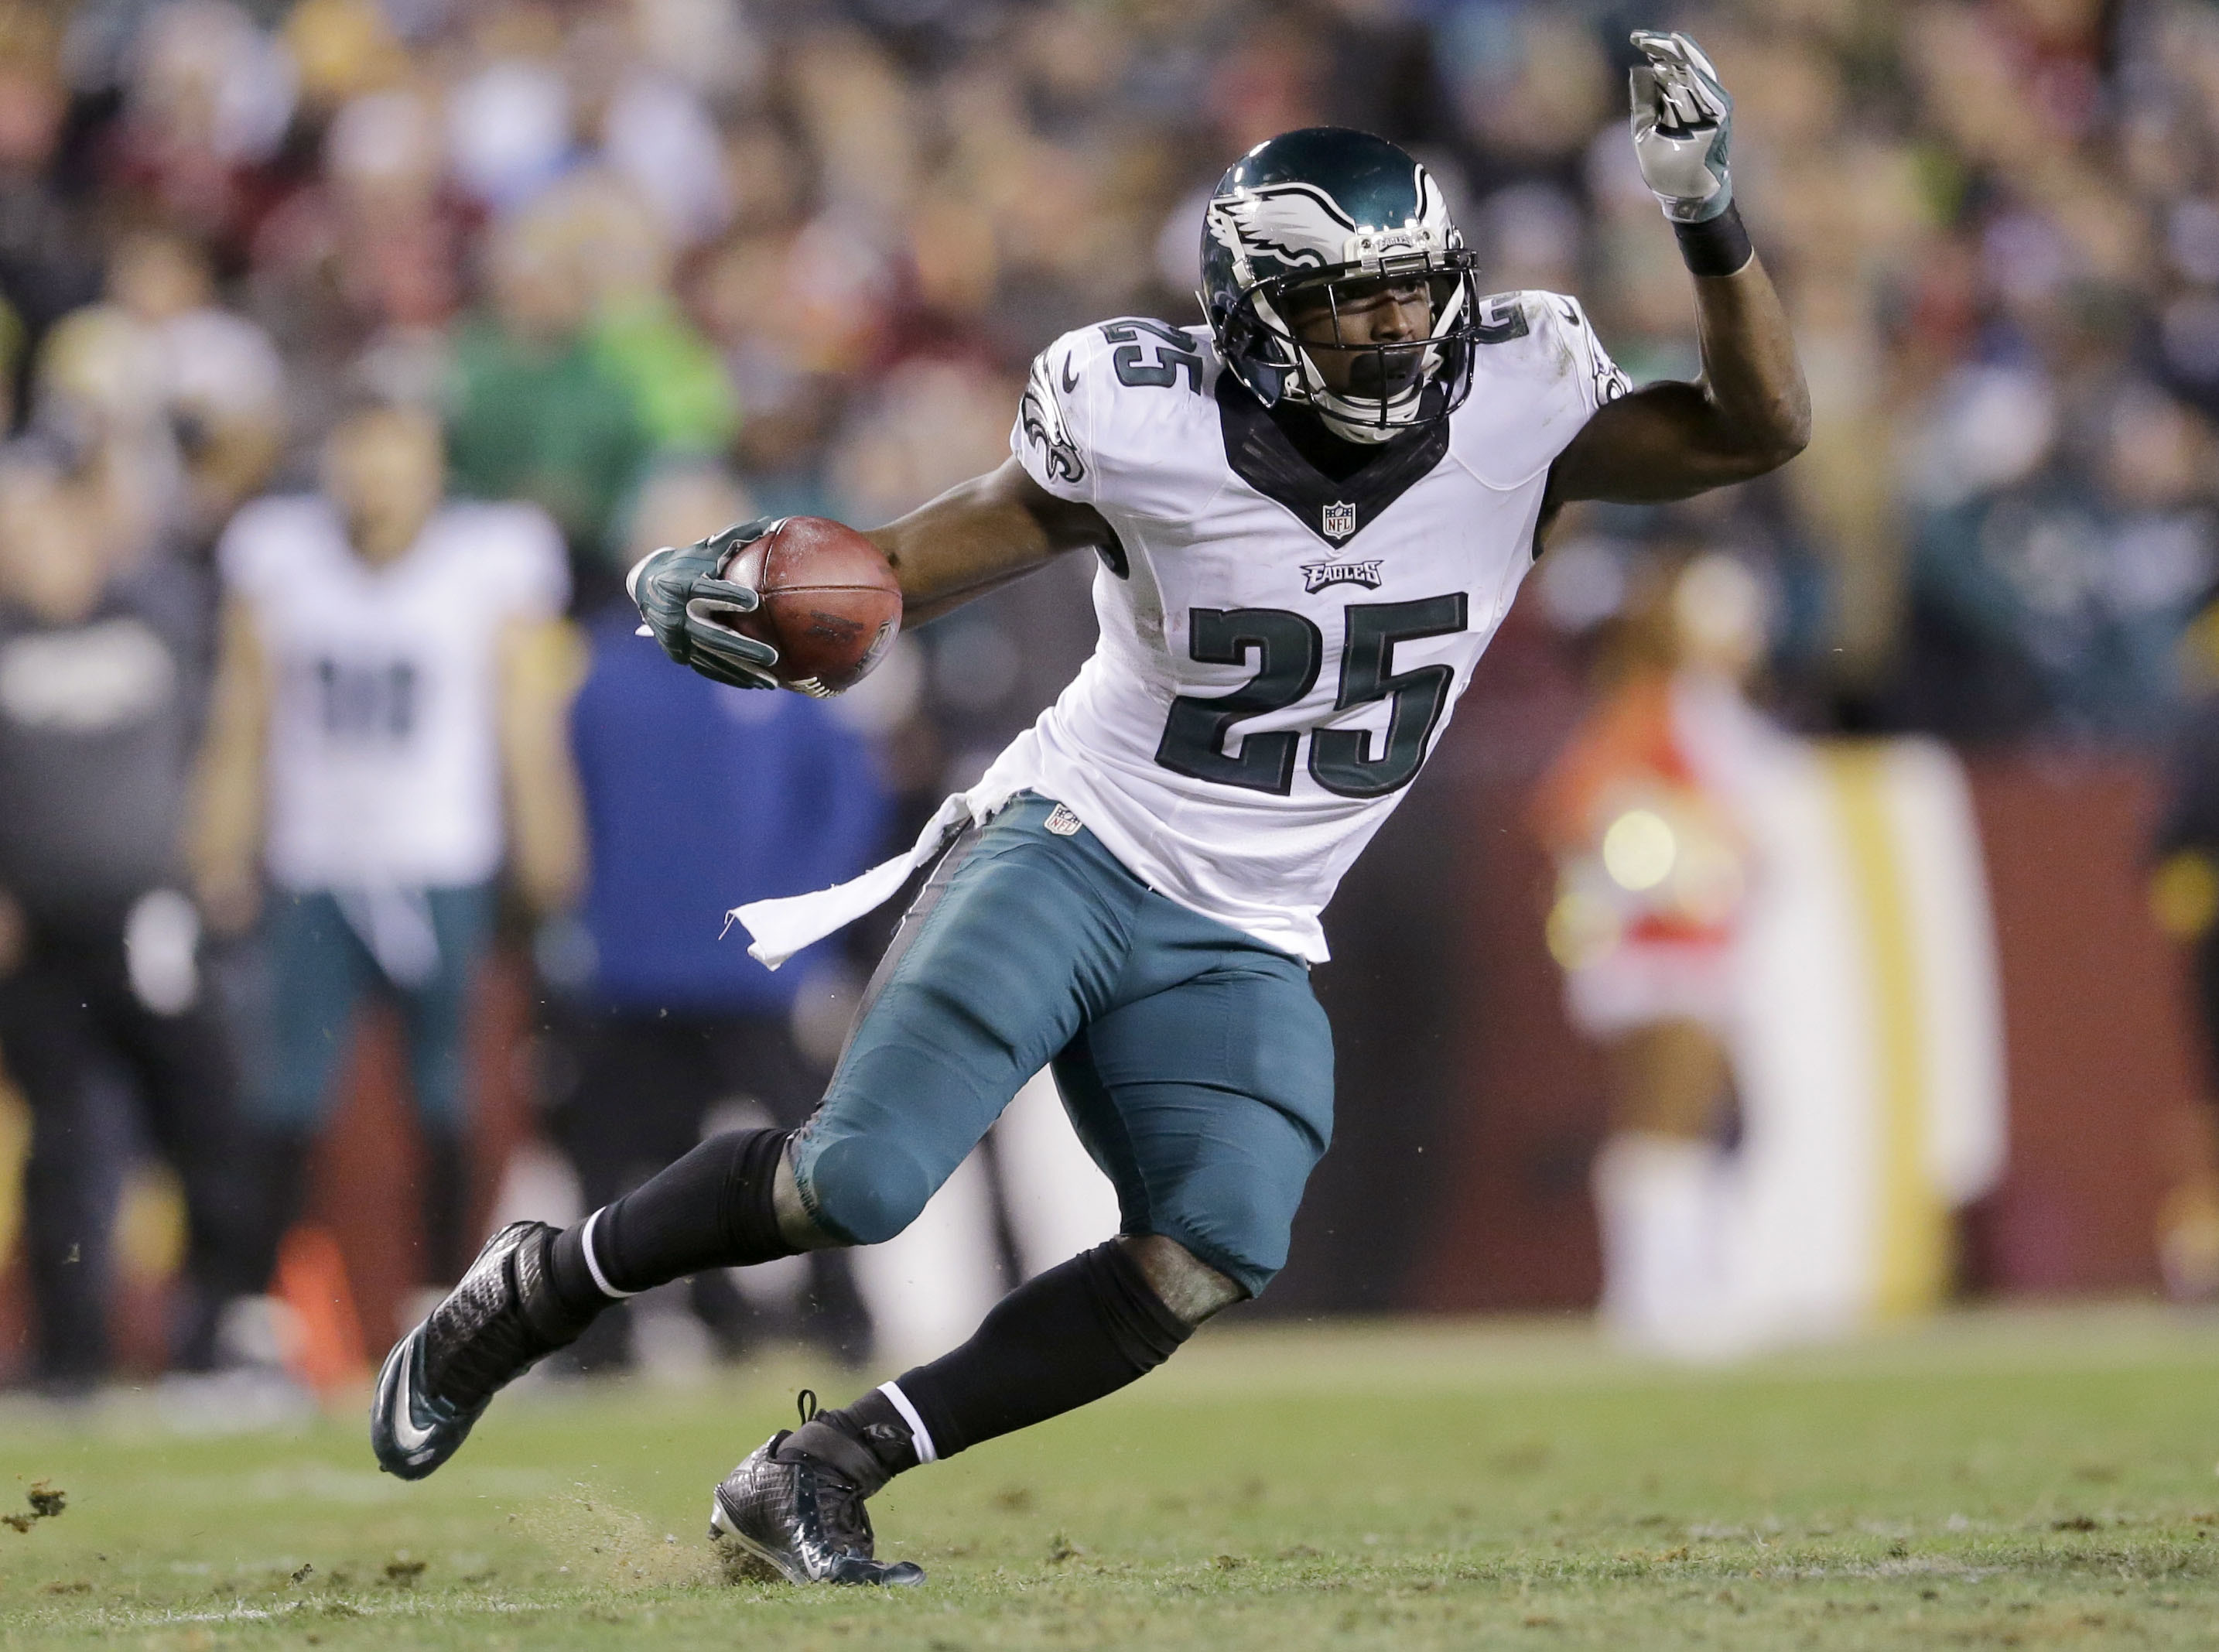 Buffalo soldier Eagles running back LeSean McCoy led the NFL with 1,607 yards rushing in